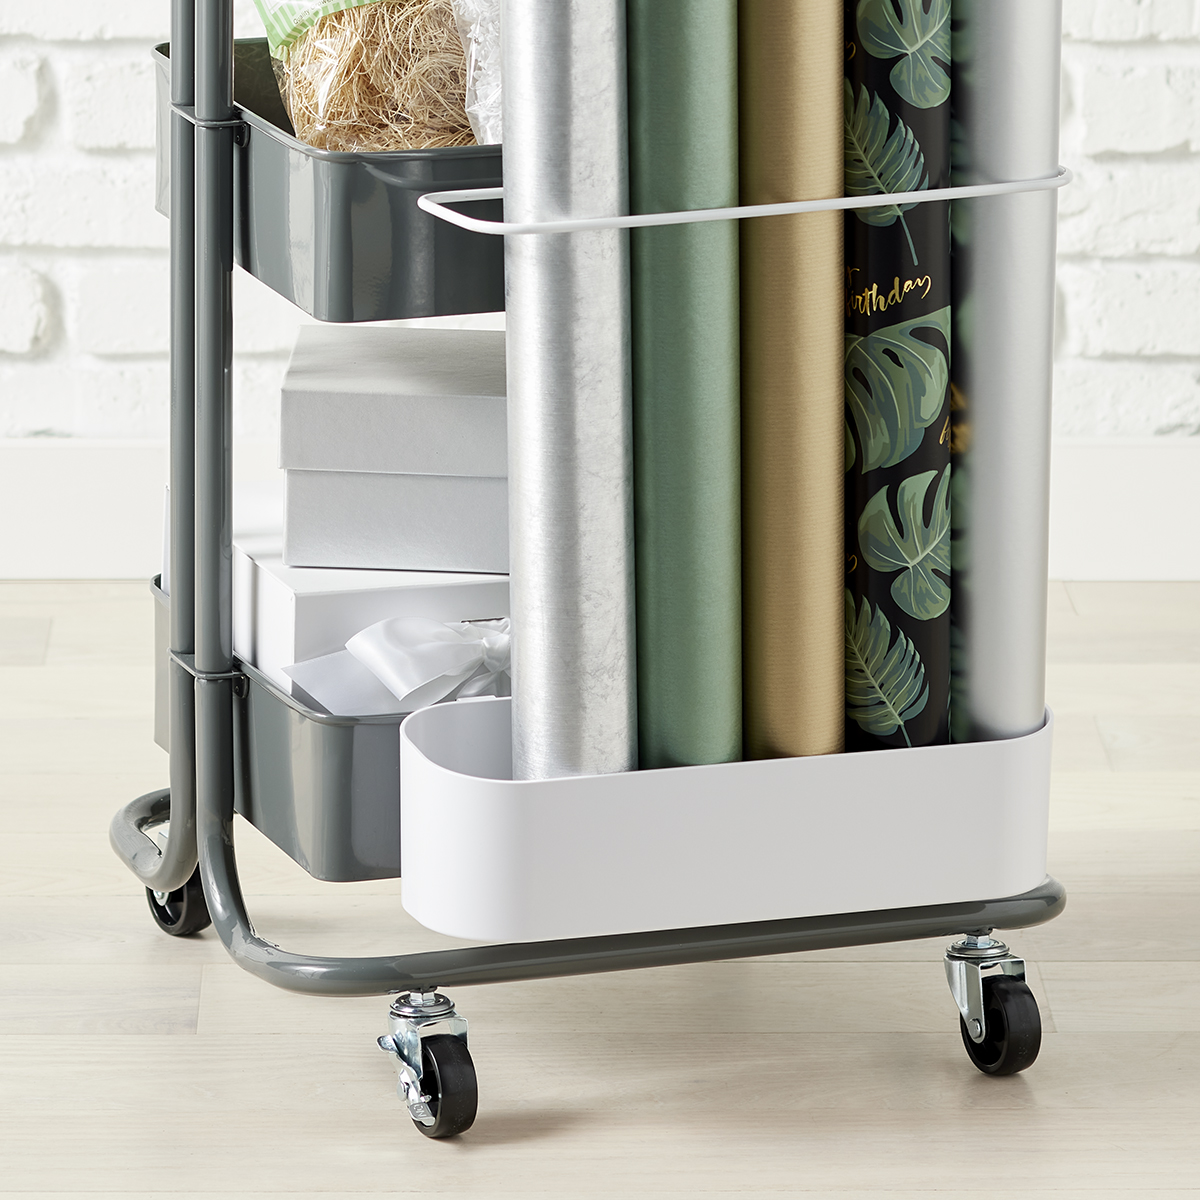 The Container Store 3-Tier Cart Gift Wrap Organizer | The Container Store